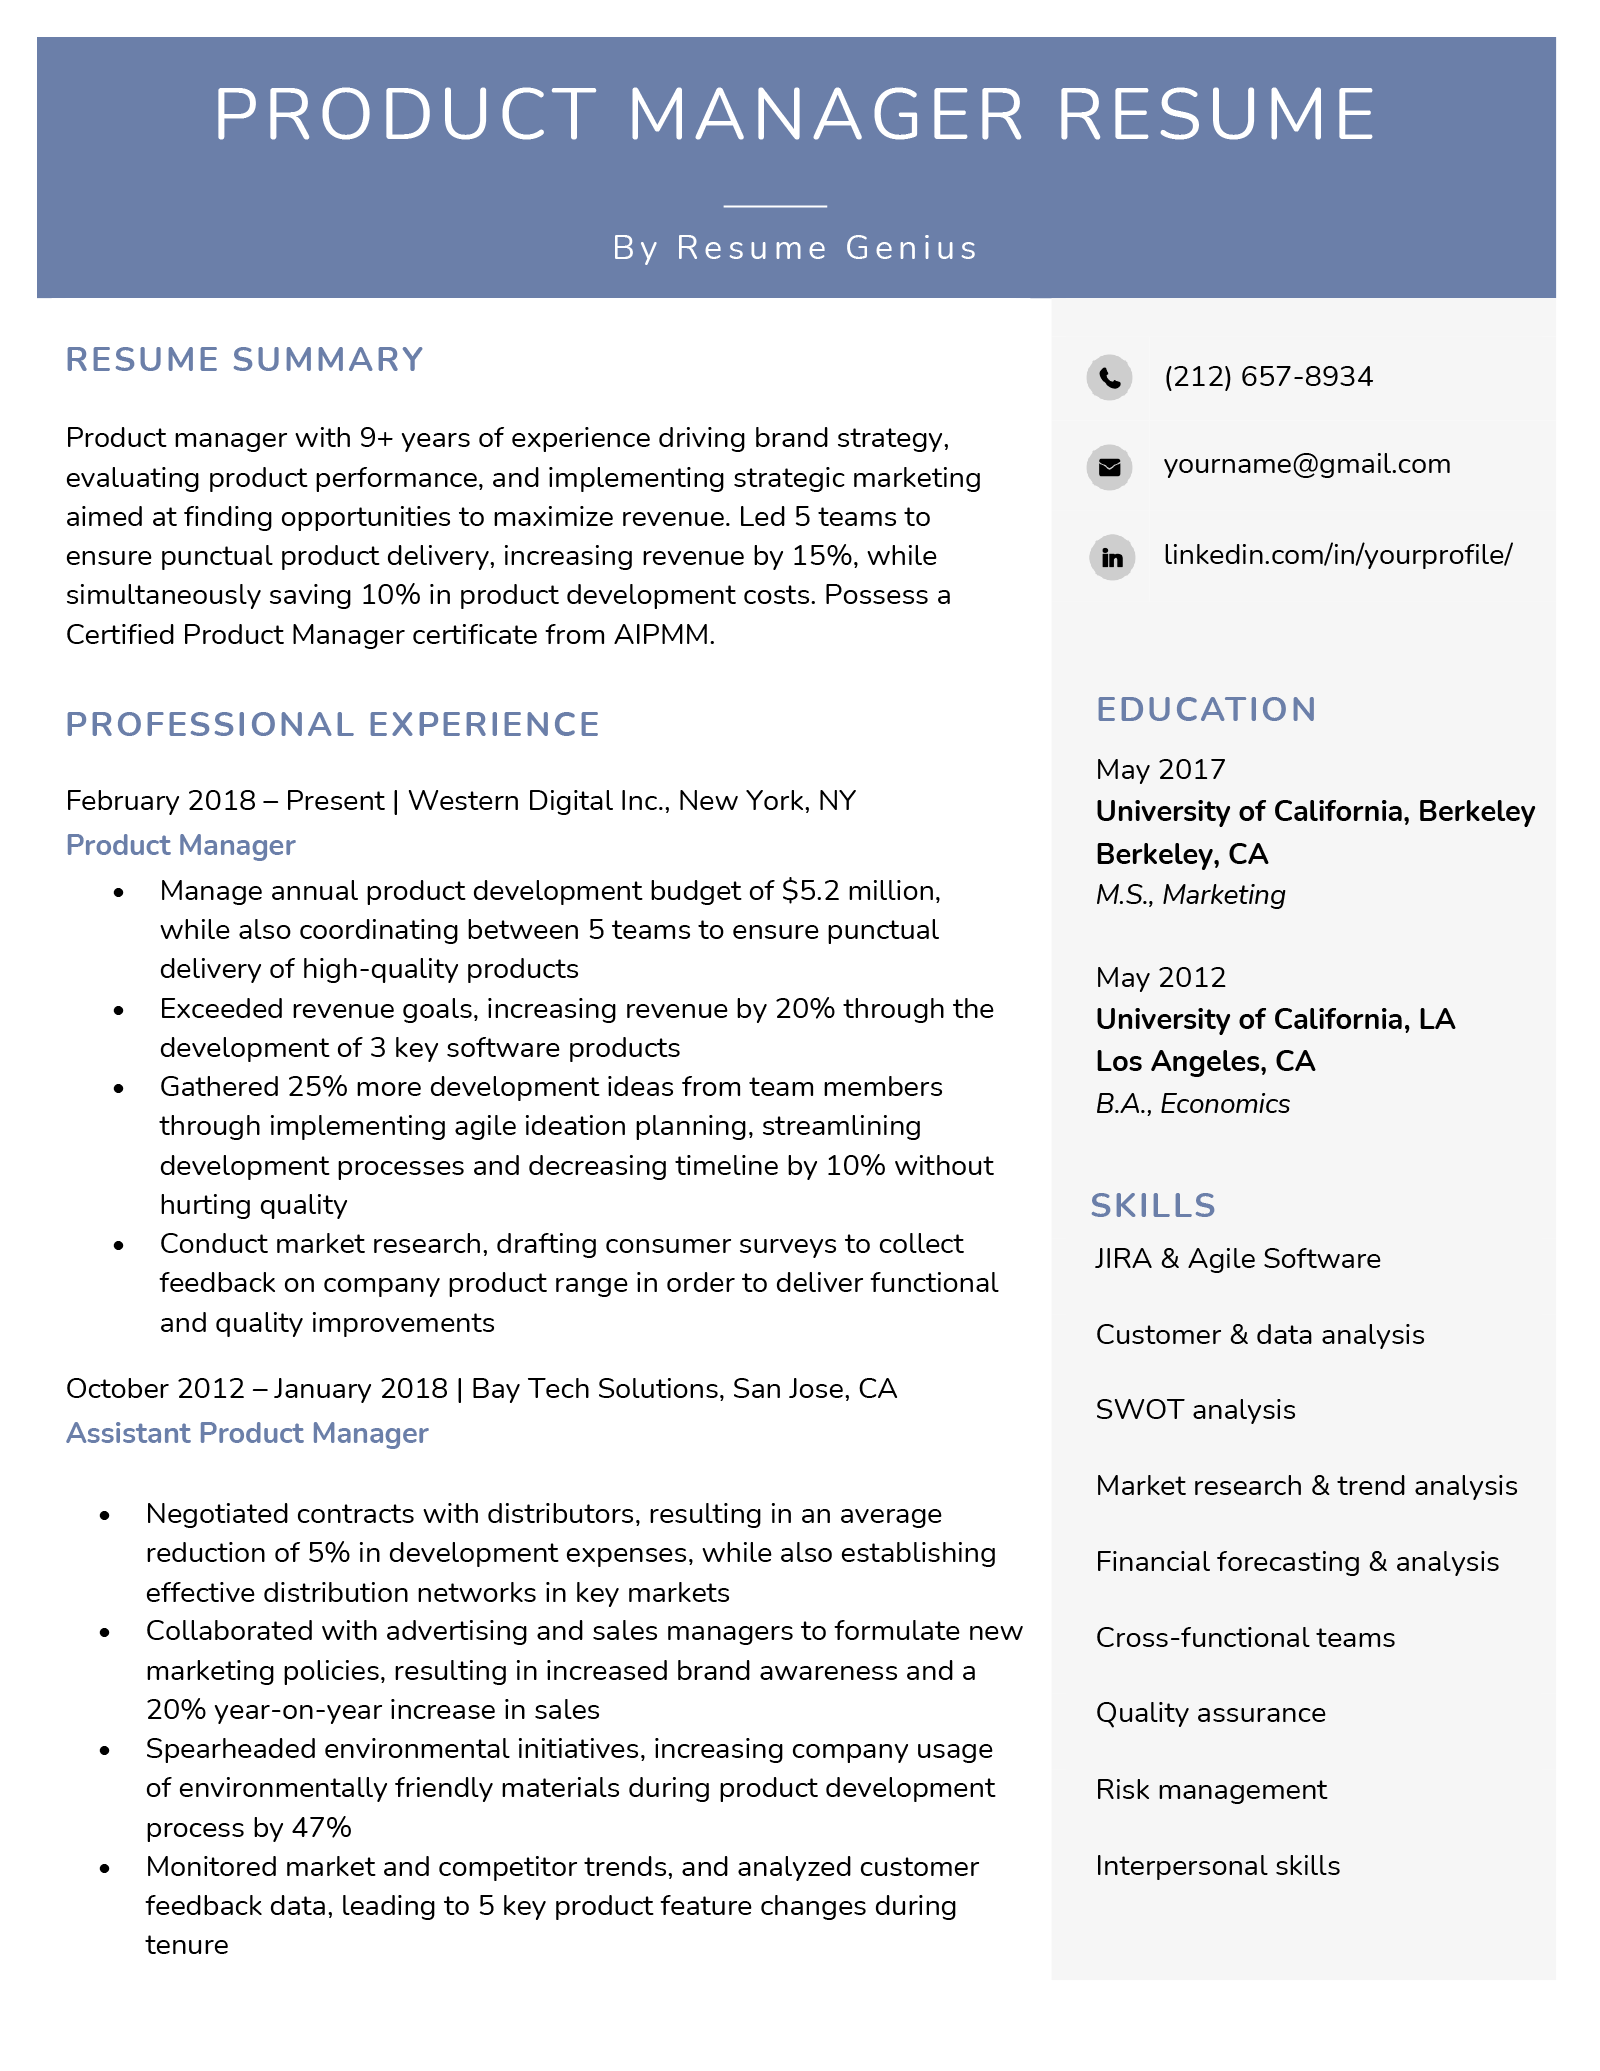 An example of a product manager resume